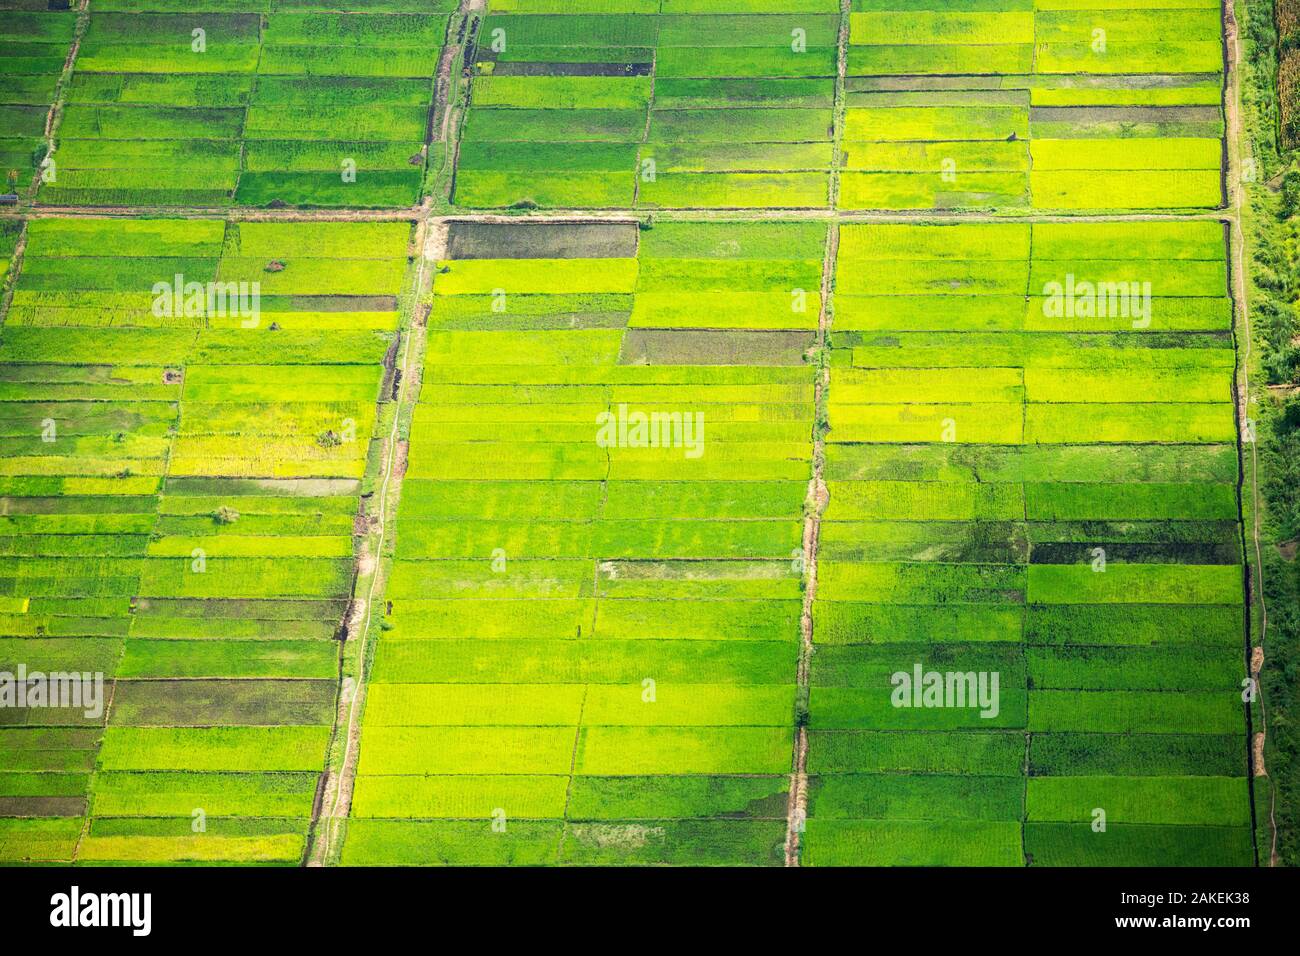 Looking down from the air onto rice paddies in the Shire Valley, Malawi, Africa. Stock Photo